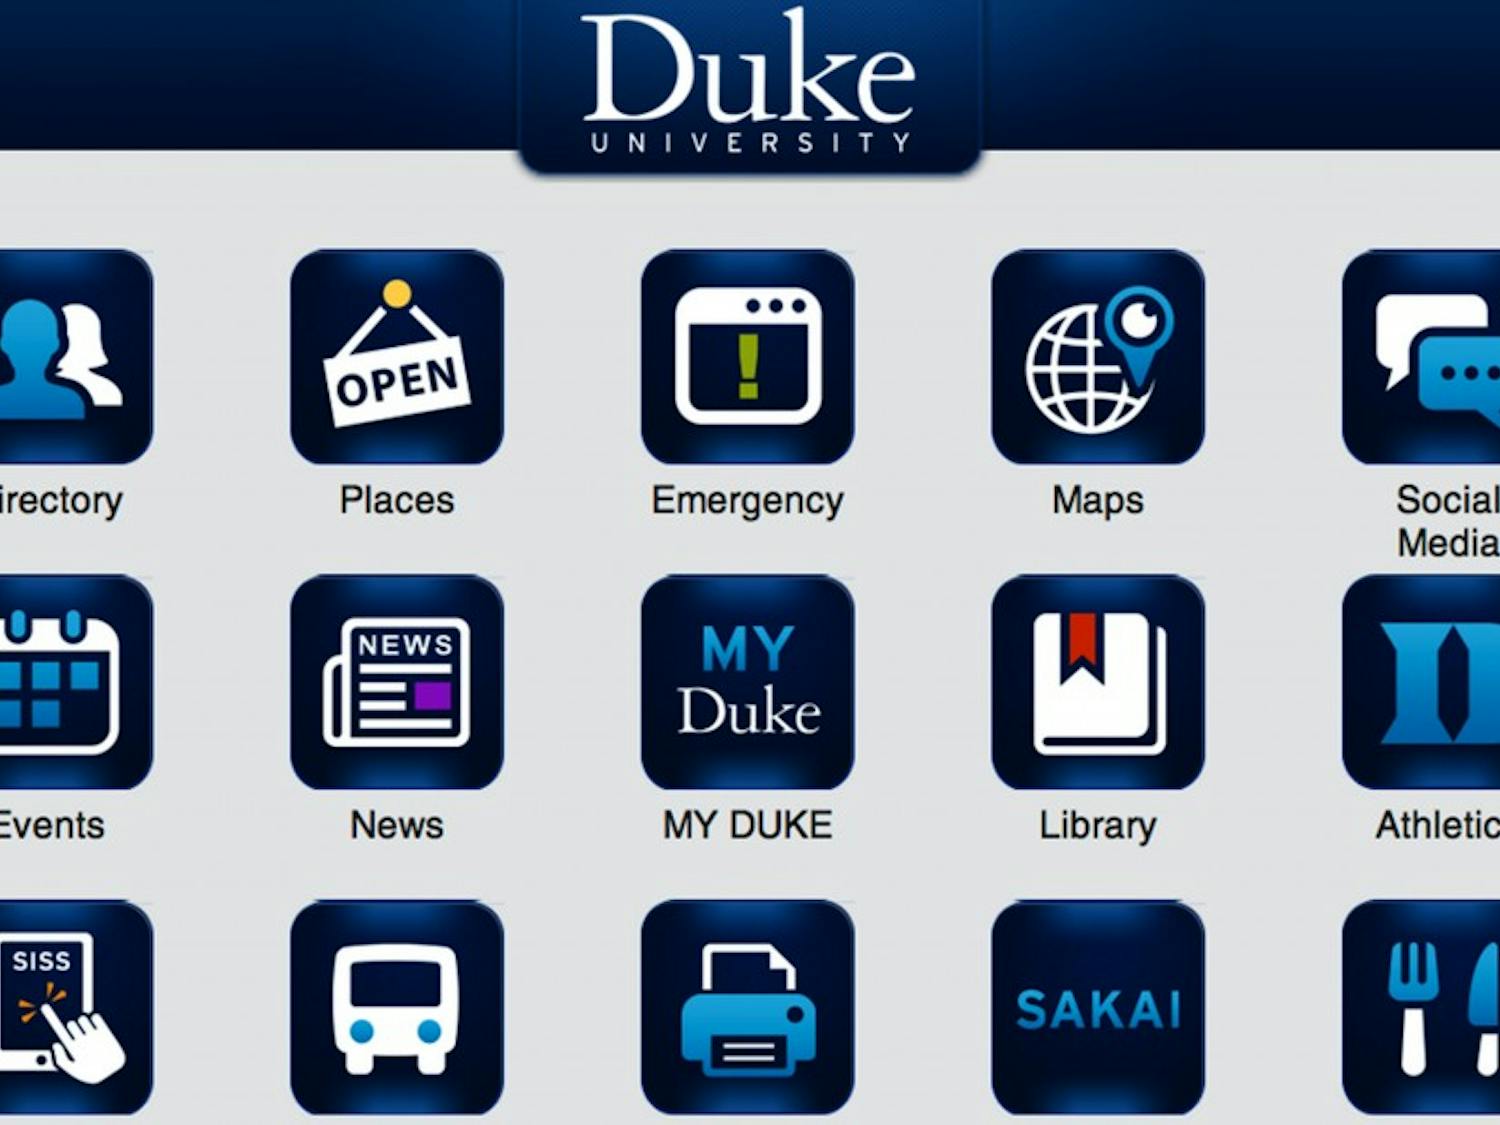 The new version of duke.edu comes with a revamped mobile site, picture above.